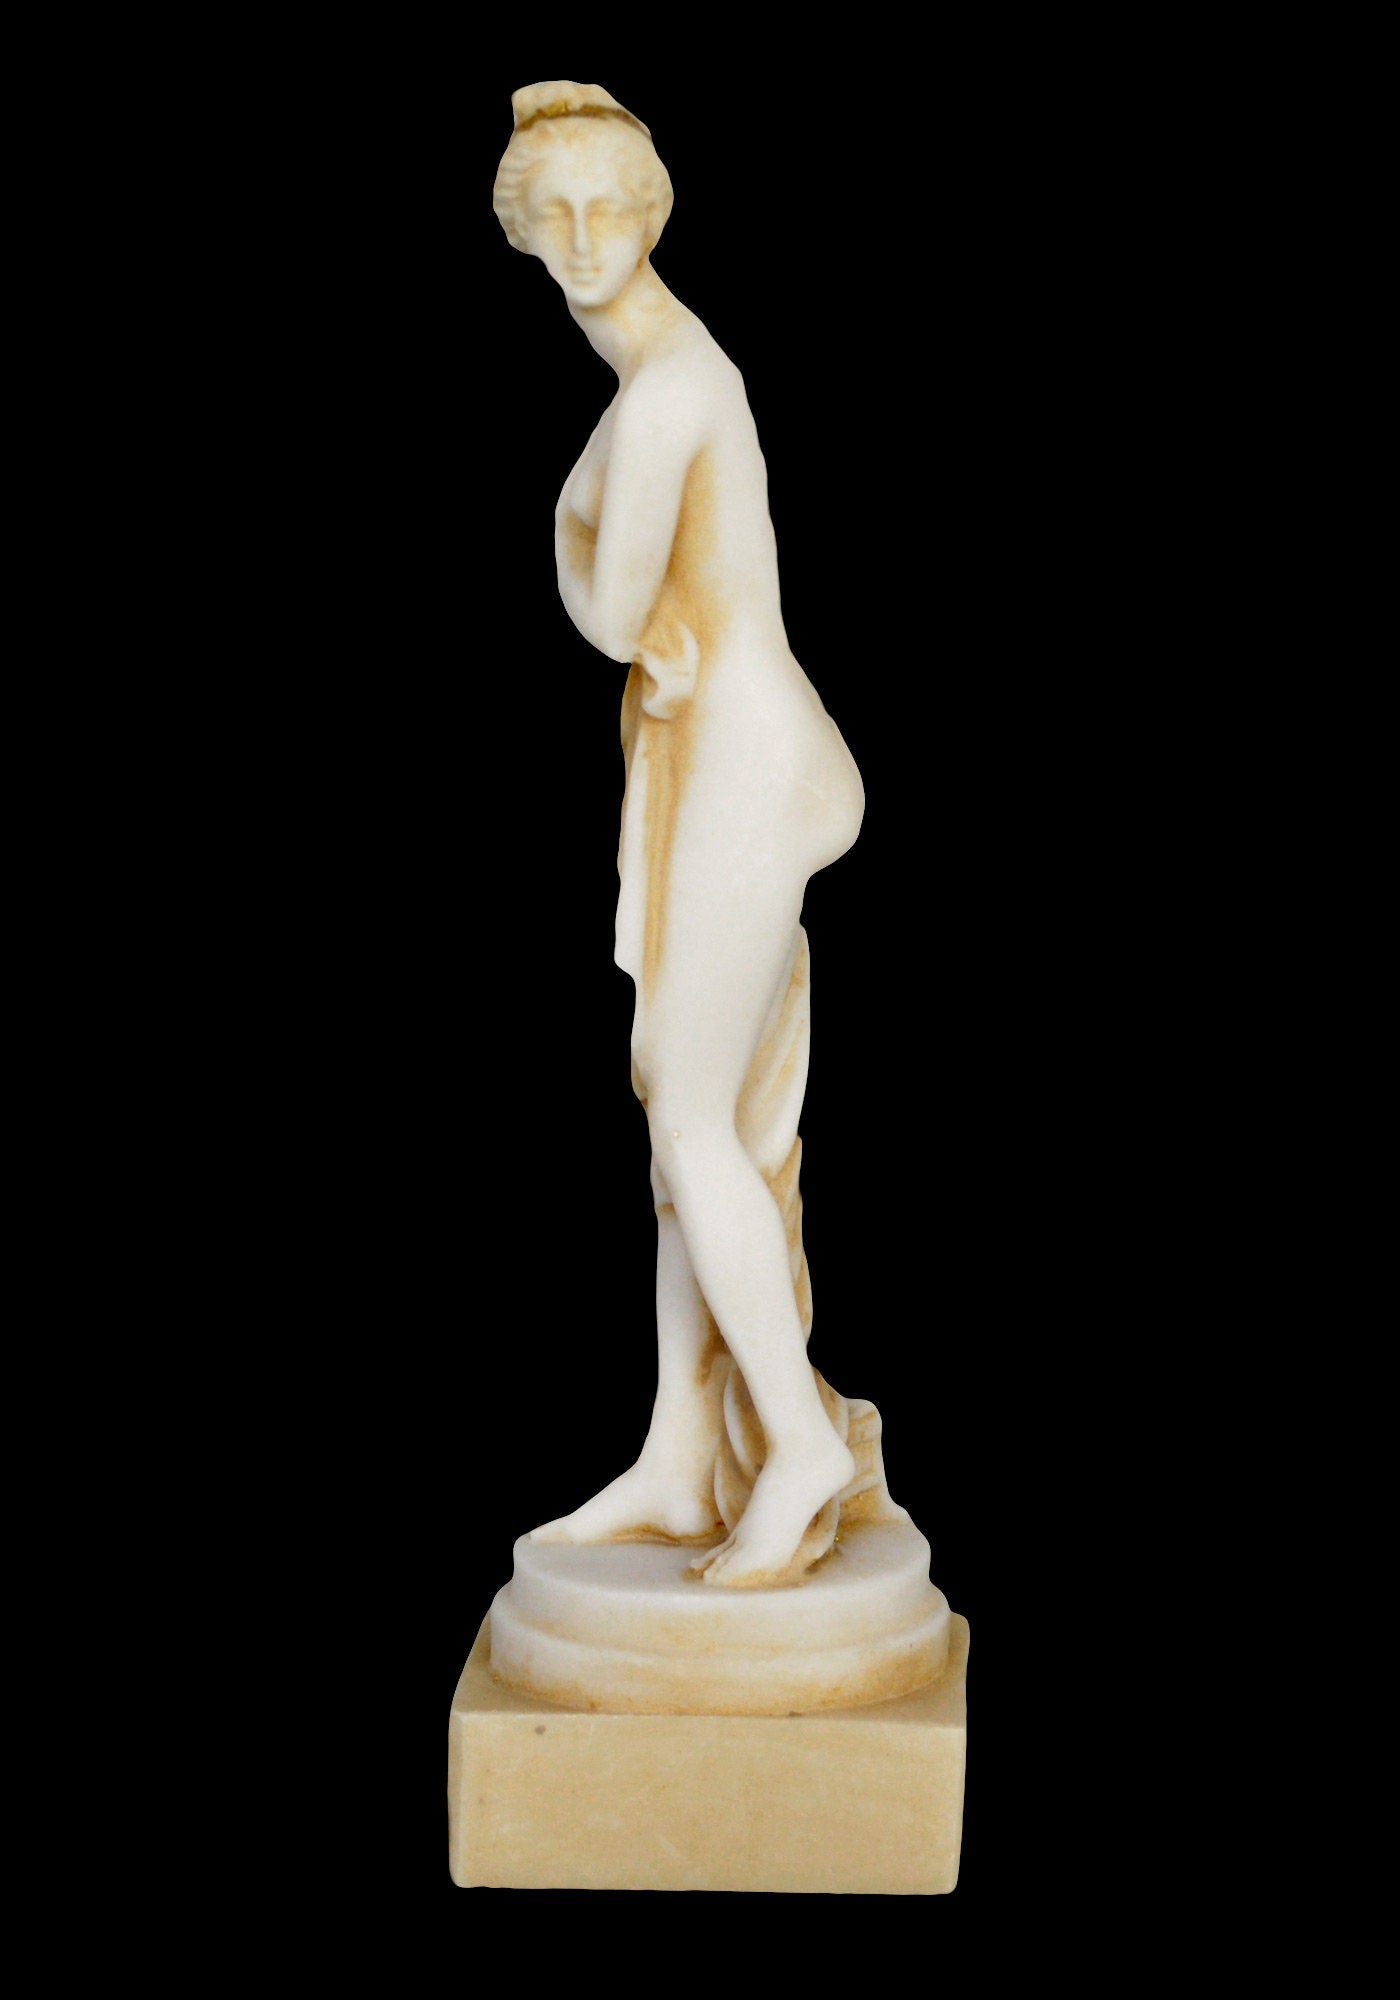 Sappho of Lesbos  -  630–570 BC - Ancient Greek Lyric Poet - Tenth Muse - Ode to Aphrodite - Aged Alabaster Statue